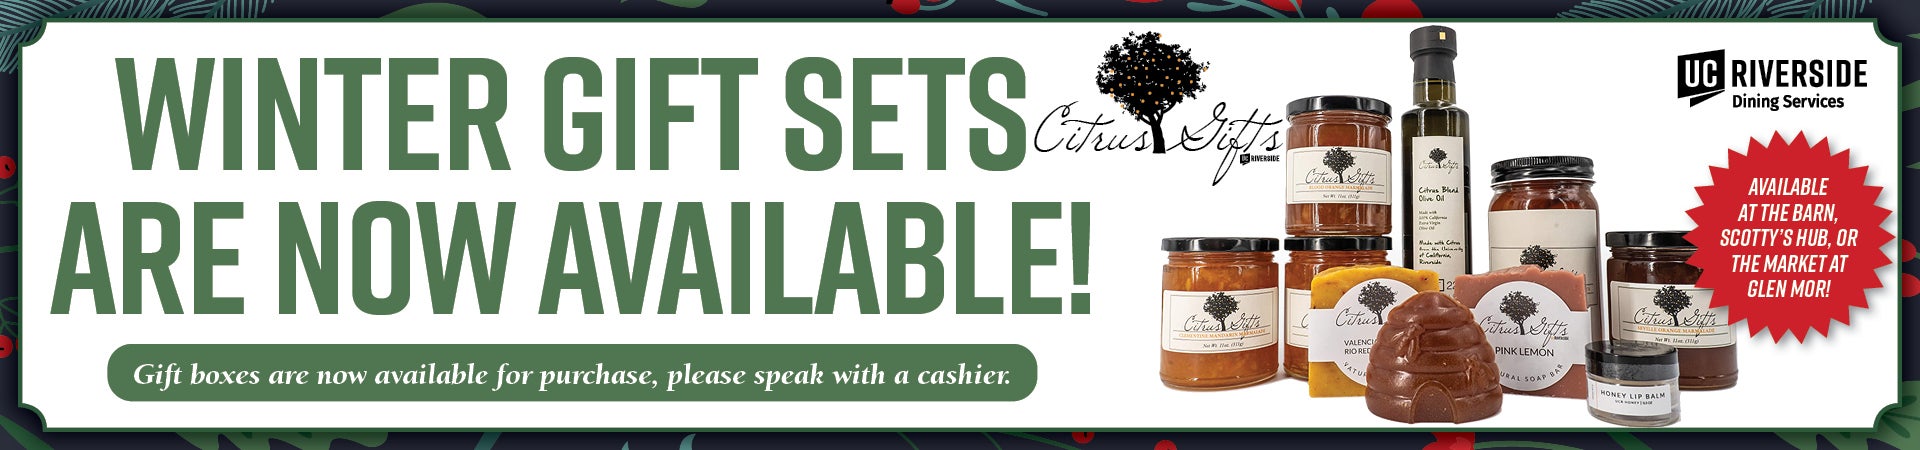 Citrus Gift Winter Gift Sets Available